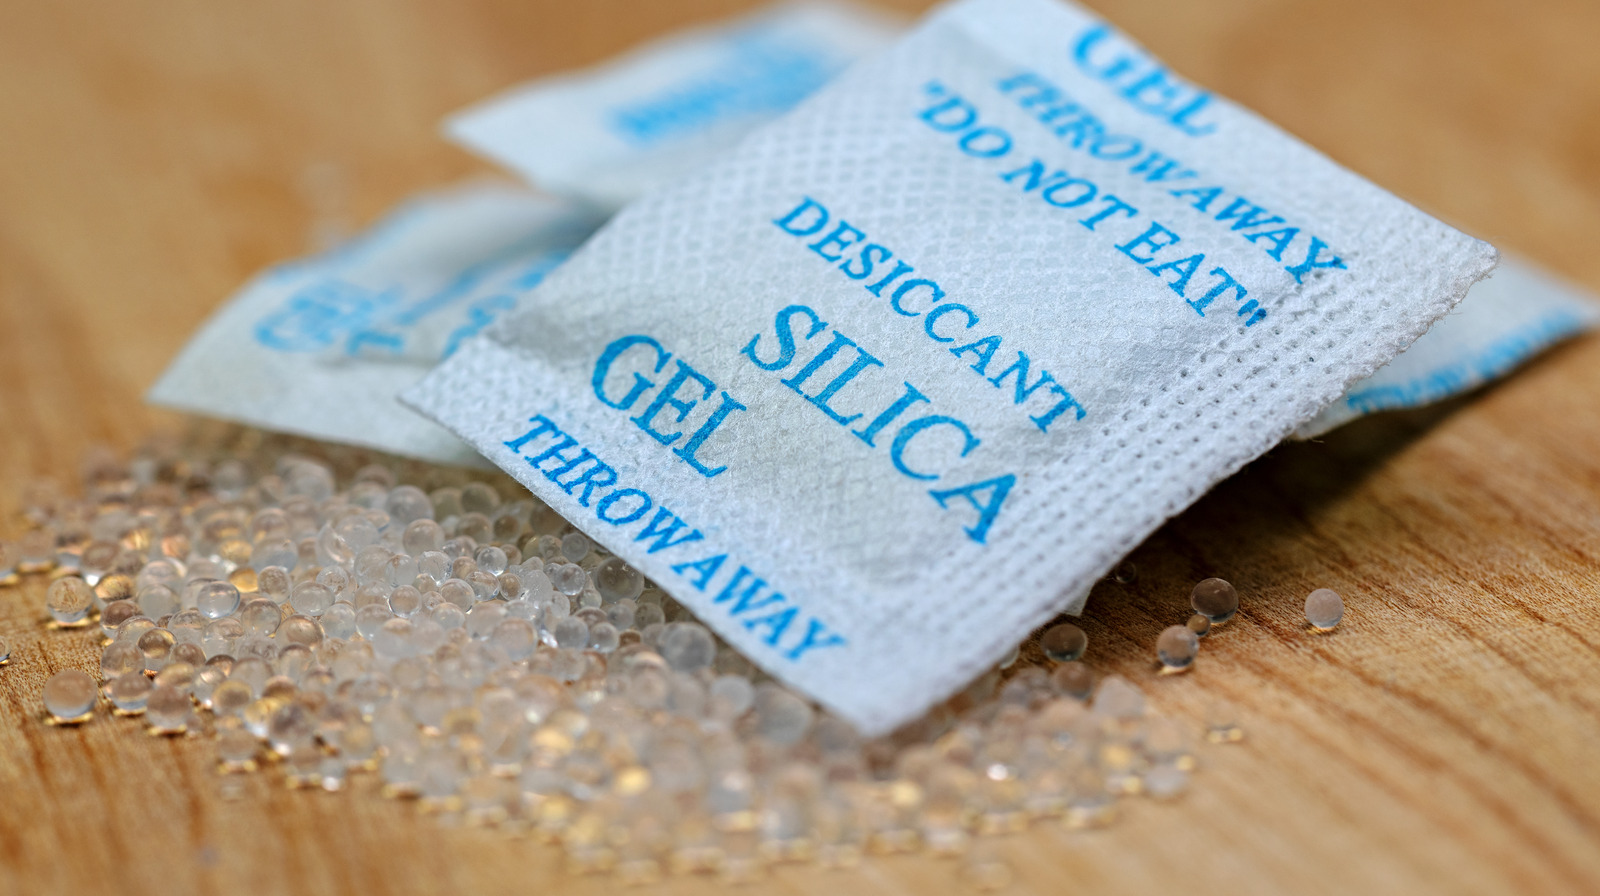 What Would Really Happen If You Ate A Silica Gel Packet?